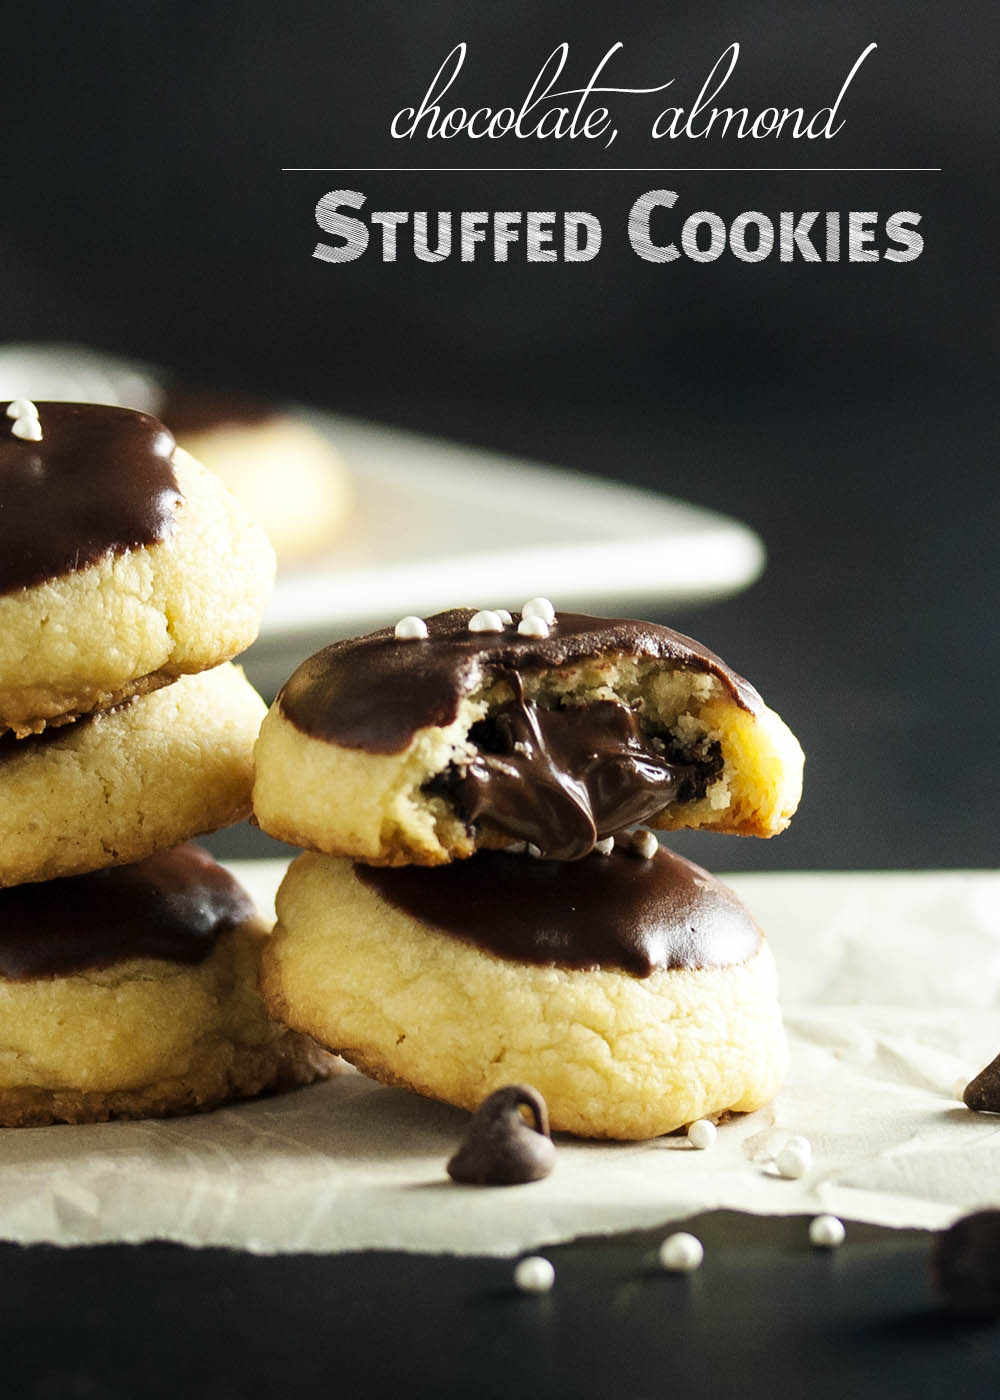 Chocolate Almond Stuffed Cookies - These chocolate covered cookies have a tender butter cookie outside and are filled with almonds and more chocolate! Just the thing to bring to a cookie exchange or to add to a cookie platter. | justalittlebitofbacon.com